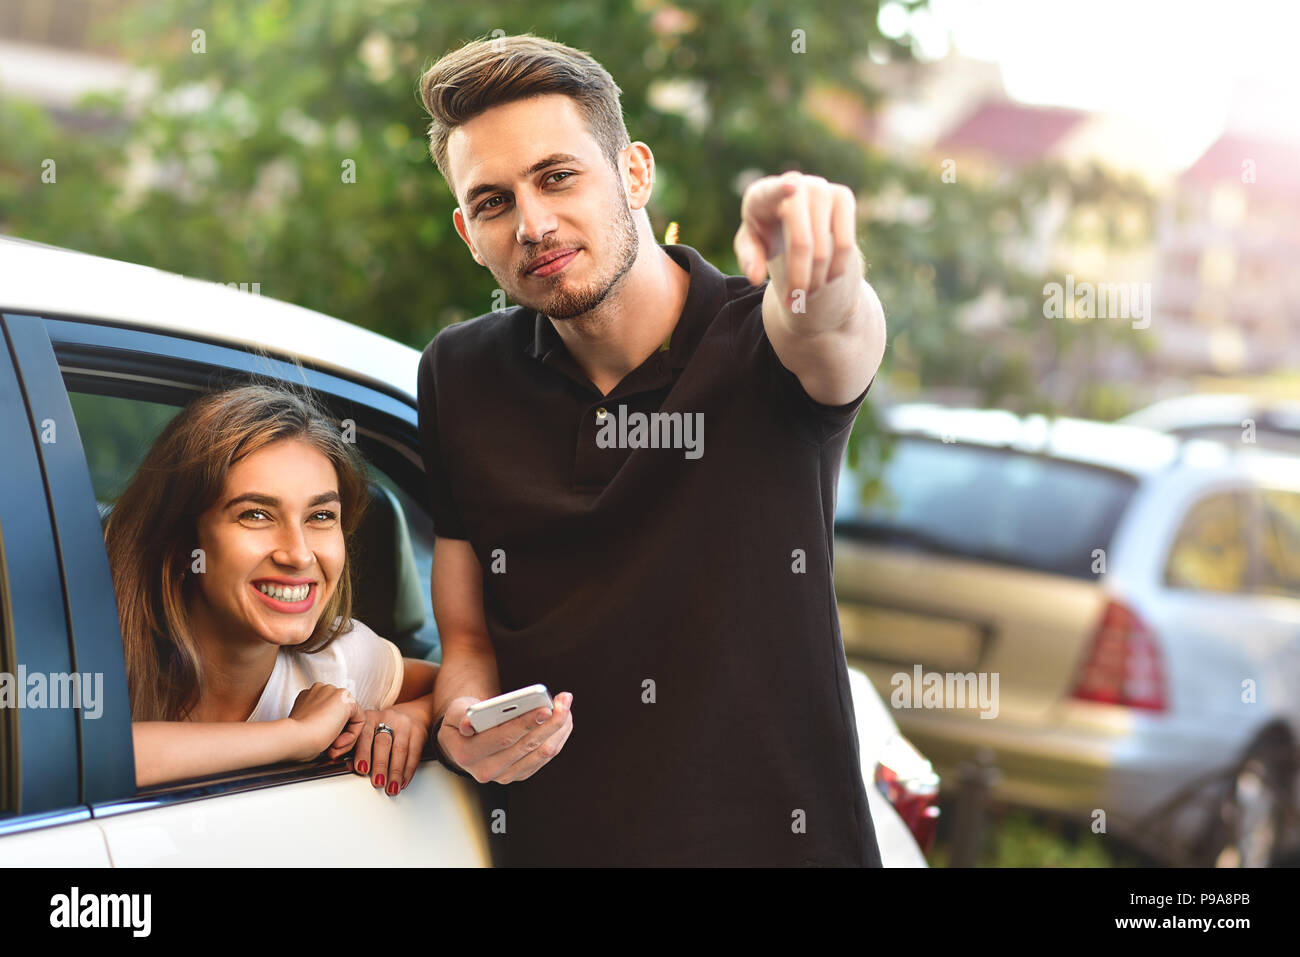 Beautiful girl sitting in the car and flirting with guy who outdoor standing Stock Photo